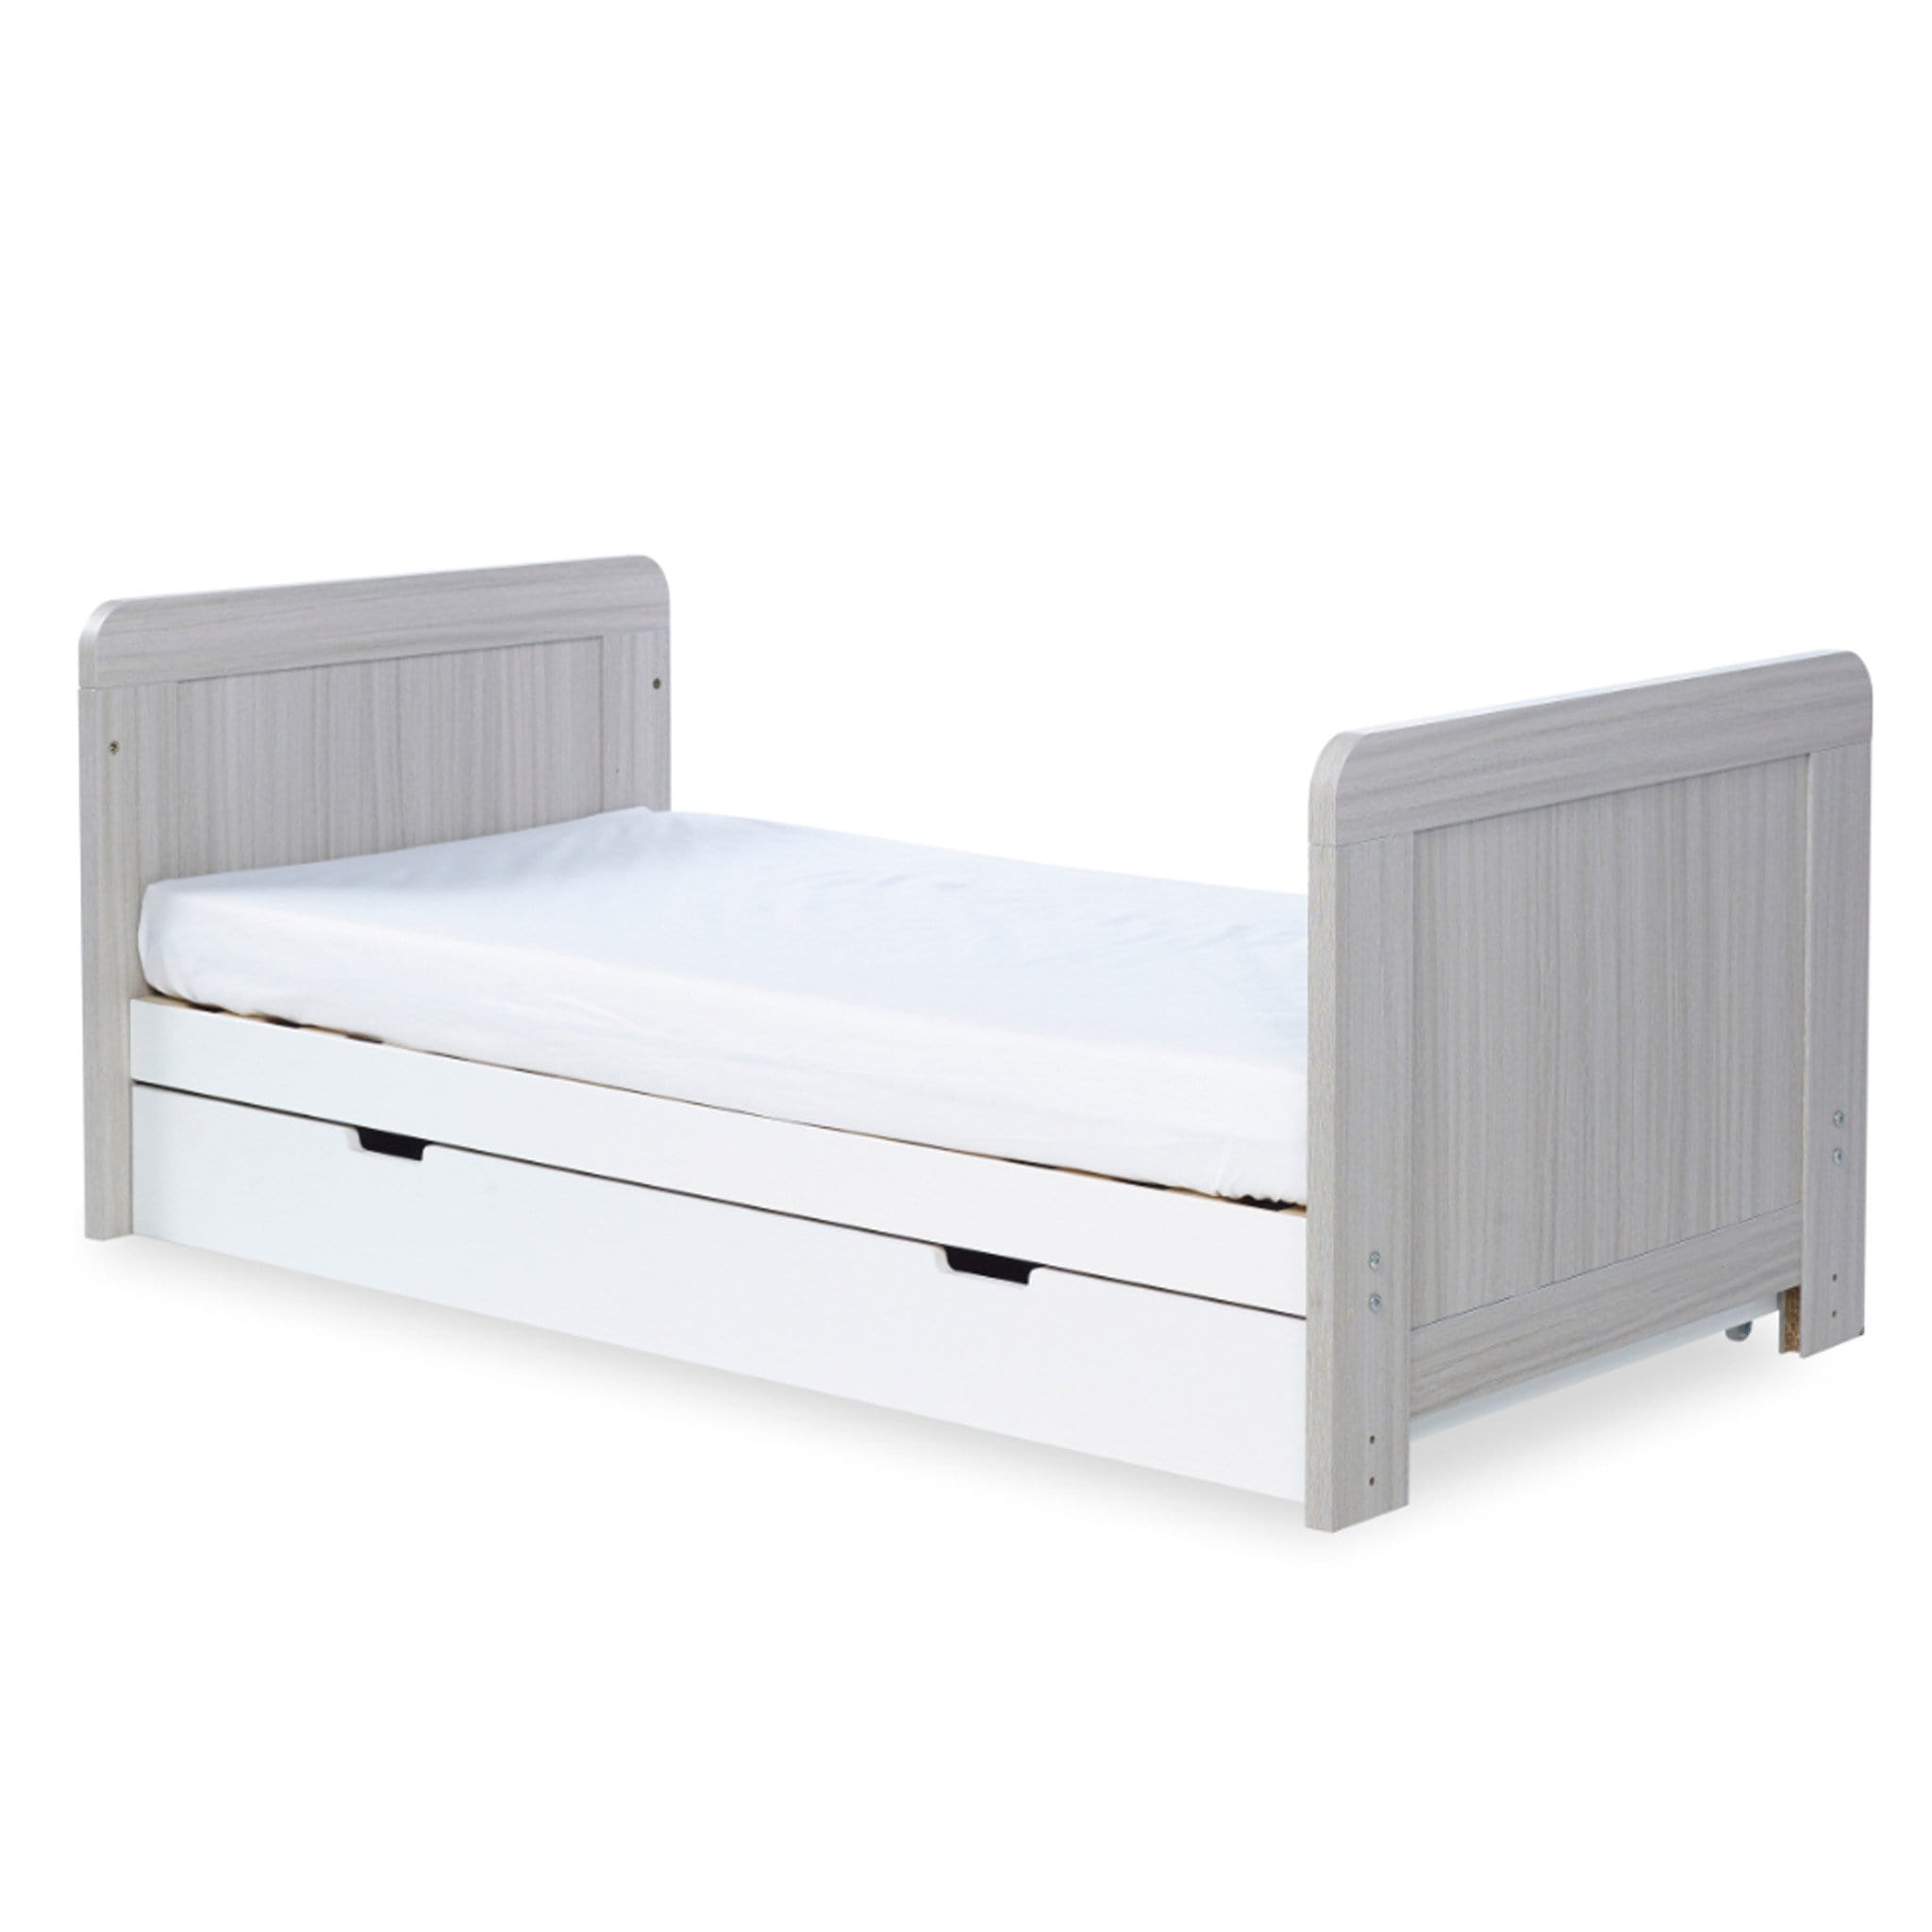 Ickle Bubba Cot Beds Ickle Bubba Pembrey Cotbed & Under Drawer Ash Grey & White